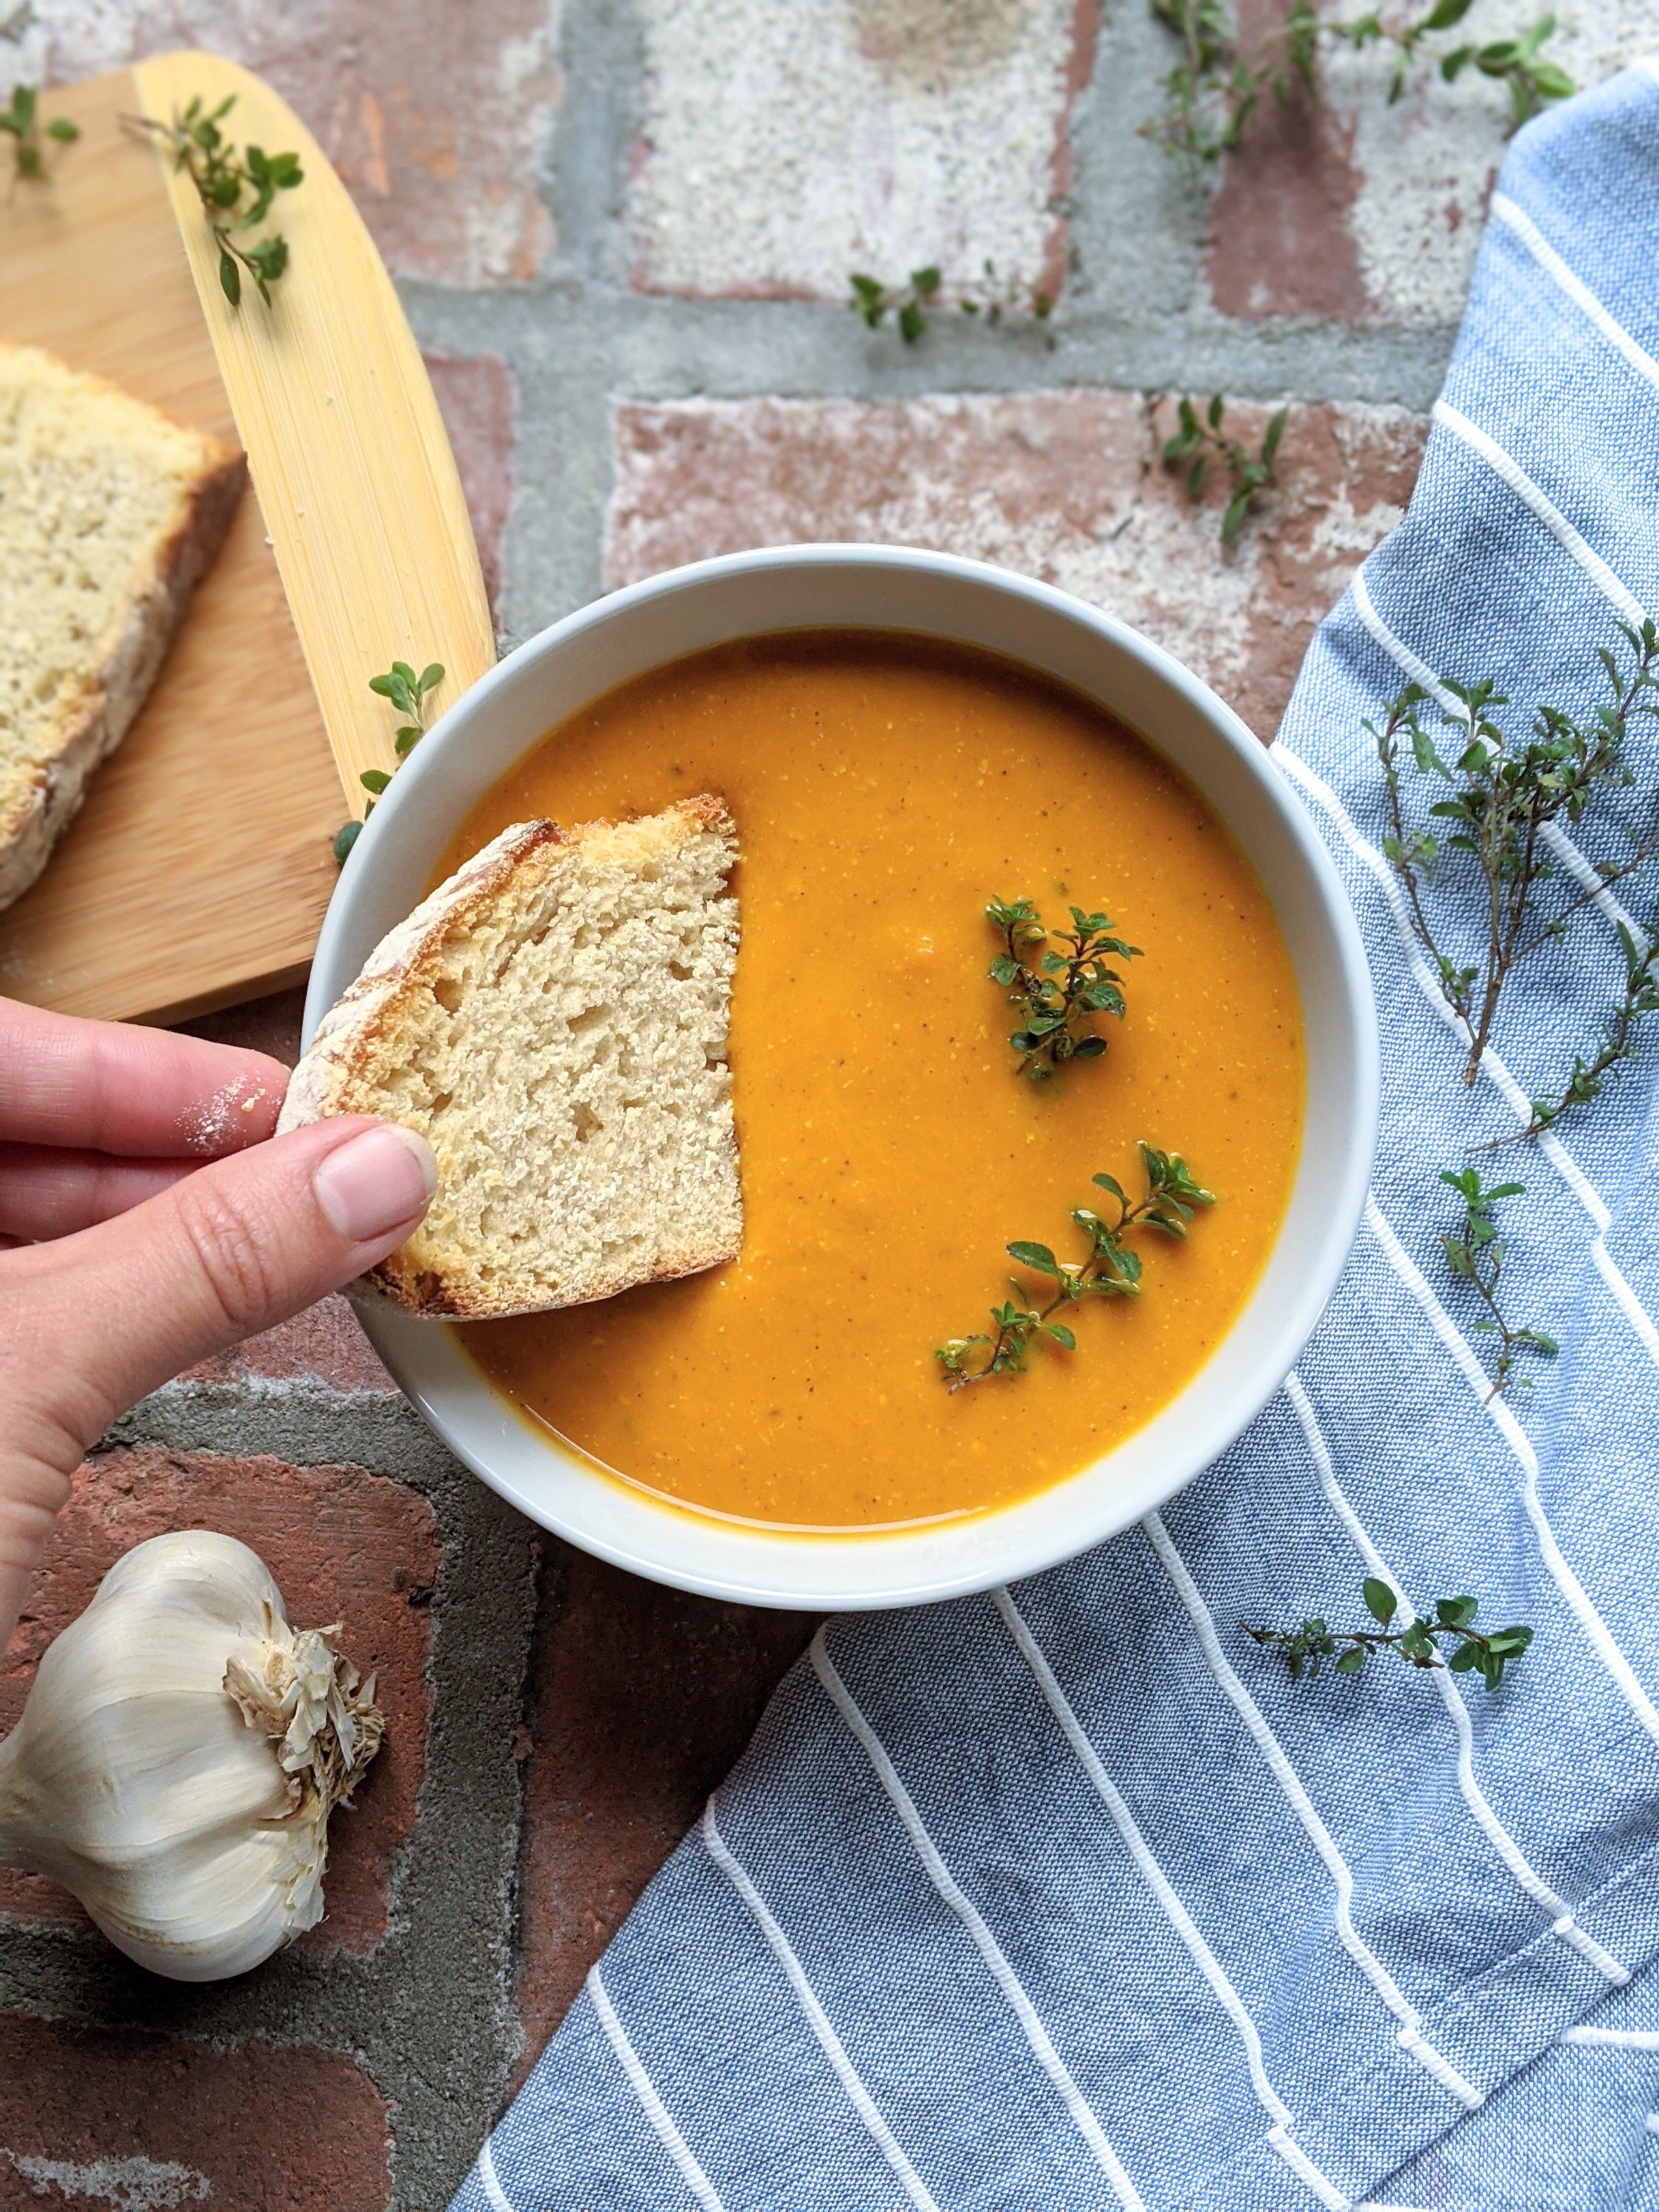 fresh carrot soup with roasted ginger and garlic recipe detox healthy bright fresh easy soups to meal prep make ahead batch cook vegan gluten free creamy pureed soup recipes healthy